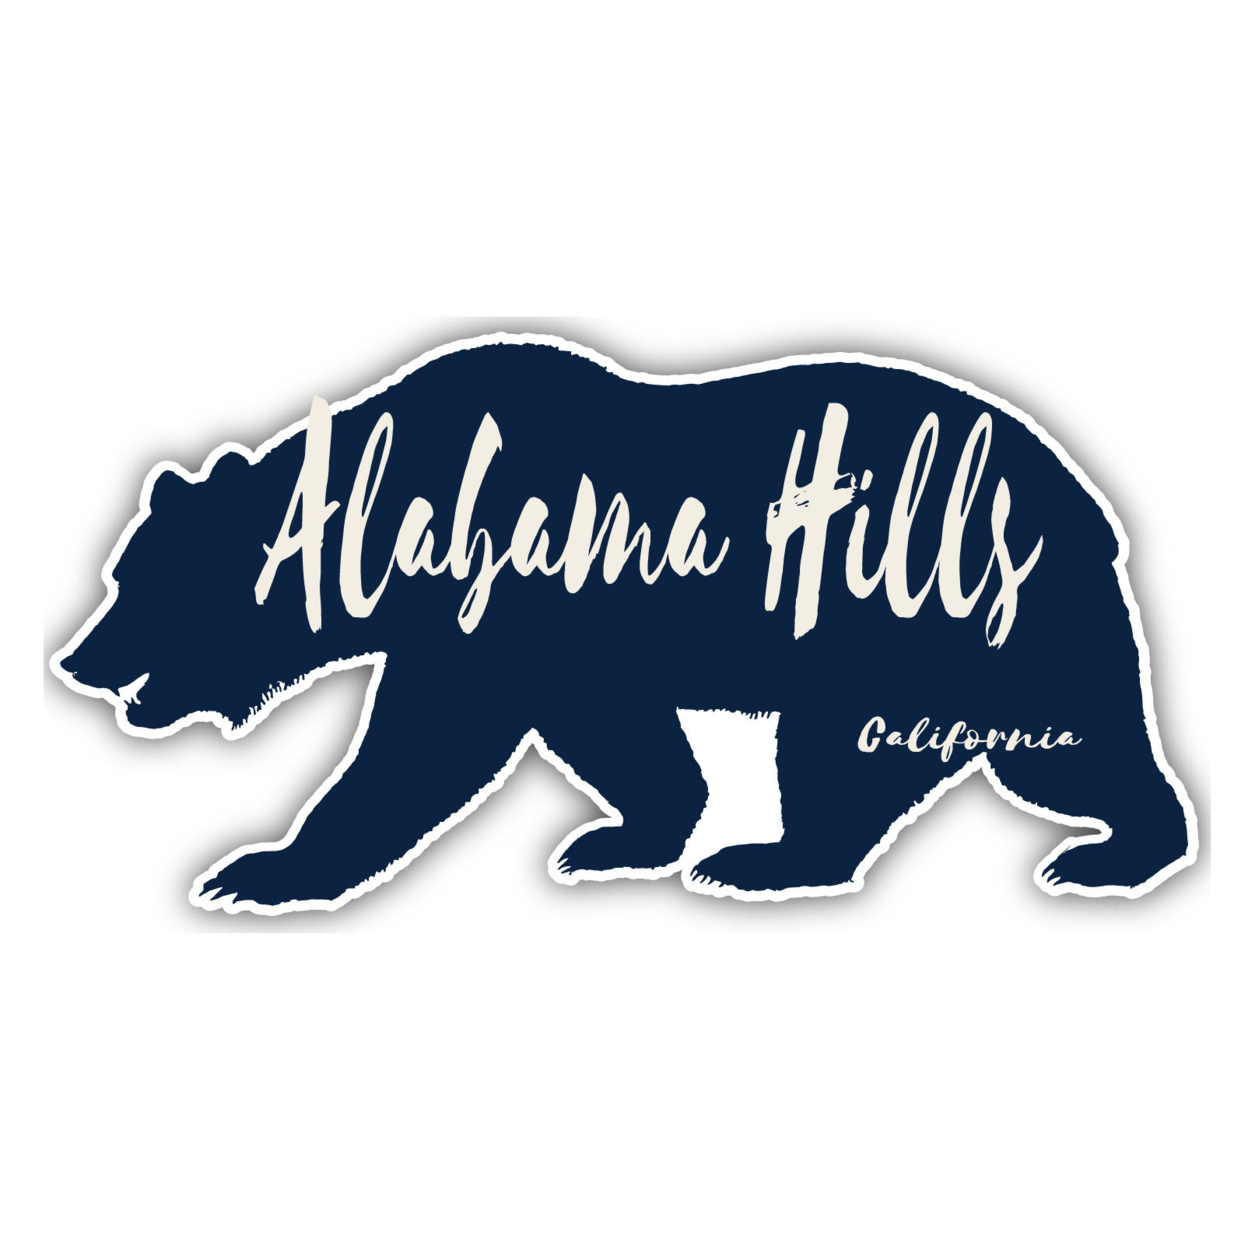 Alabama Hills California Souvenir Decorative Stickers (Choose Theme And Size) - 4-Pack, 4-Inch, Great Outdoors